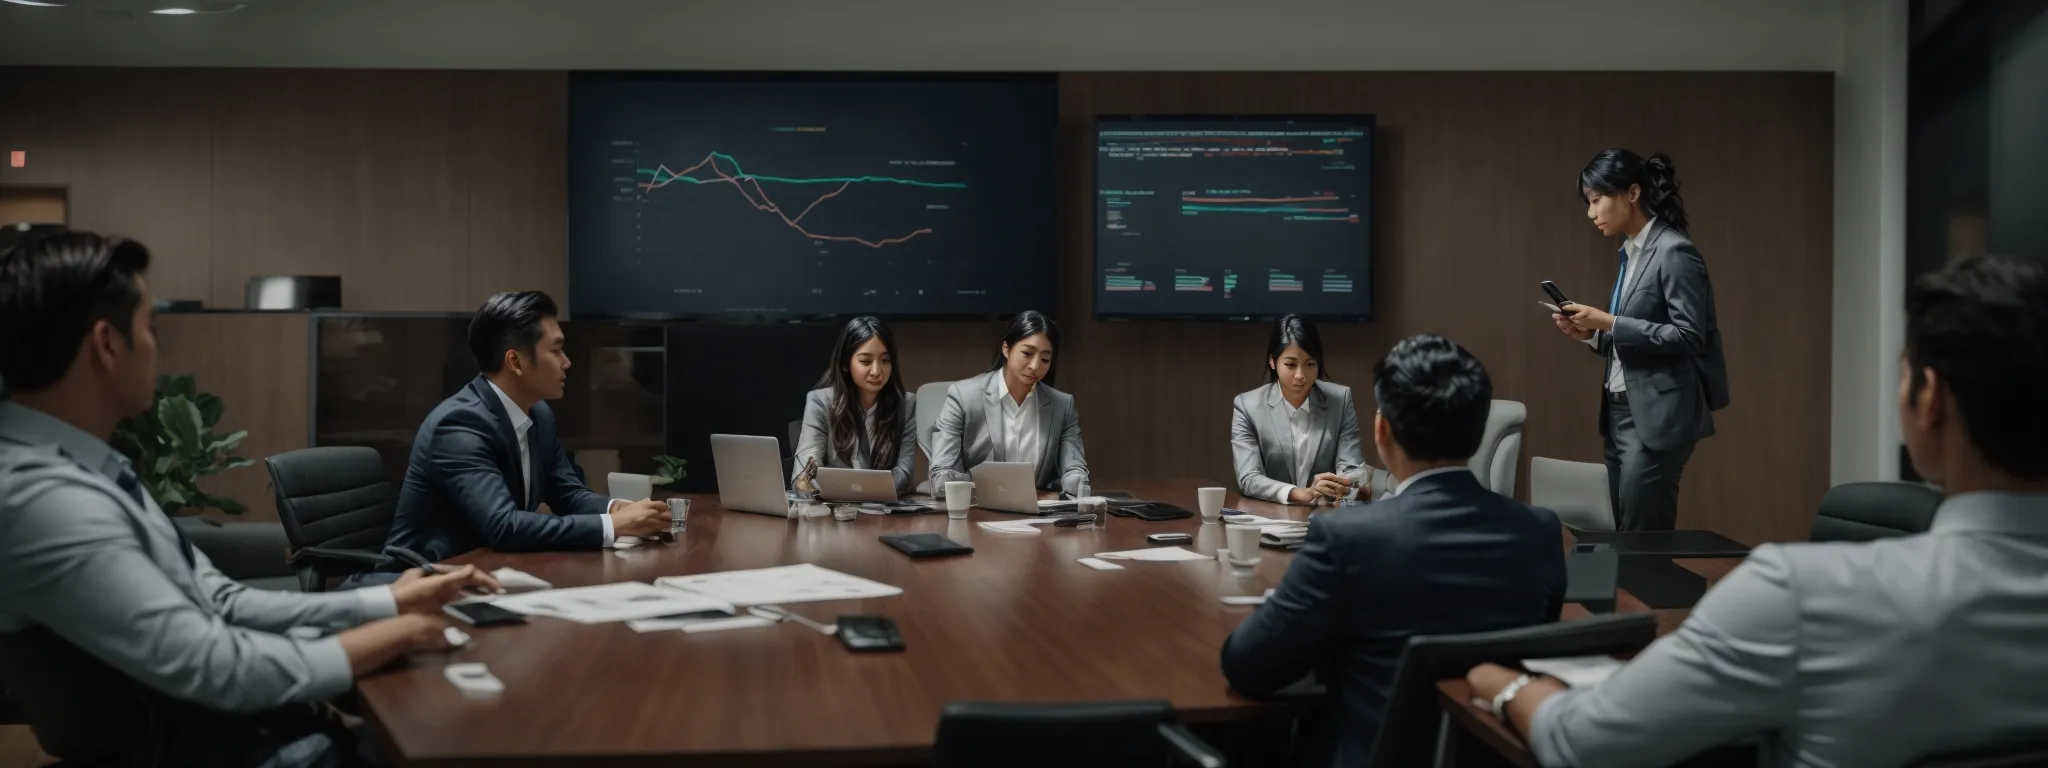 a group of marketing professionals gathered around a sleek conference table, intently discussing strategy with visible charts and digital devices, exuding a collaborative and focused atmosphere.